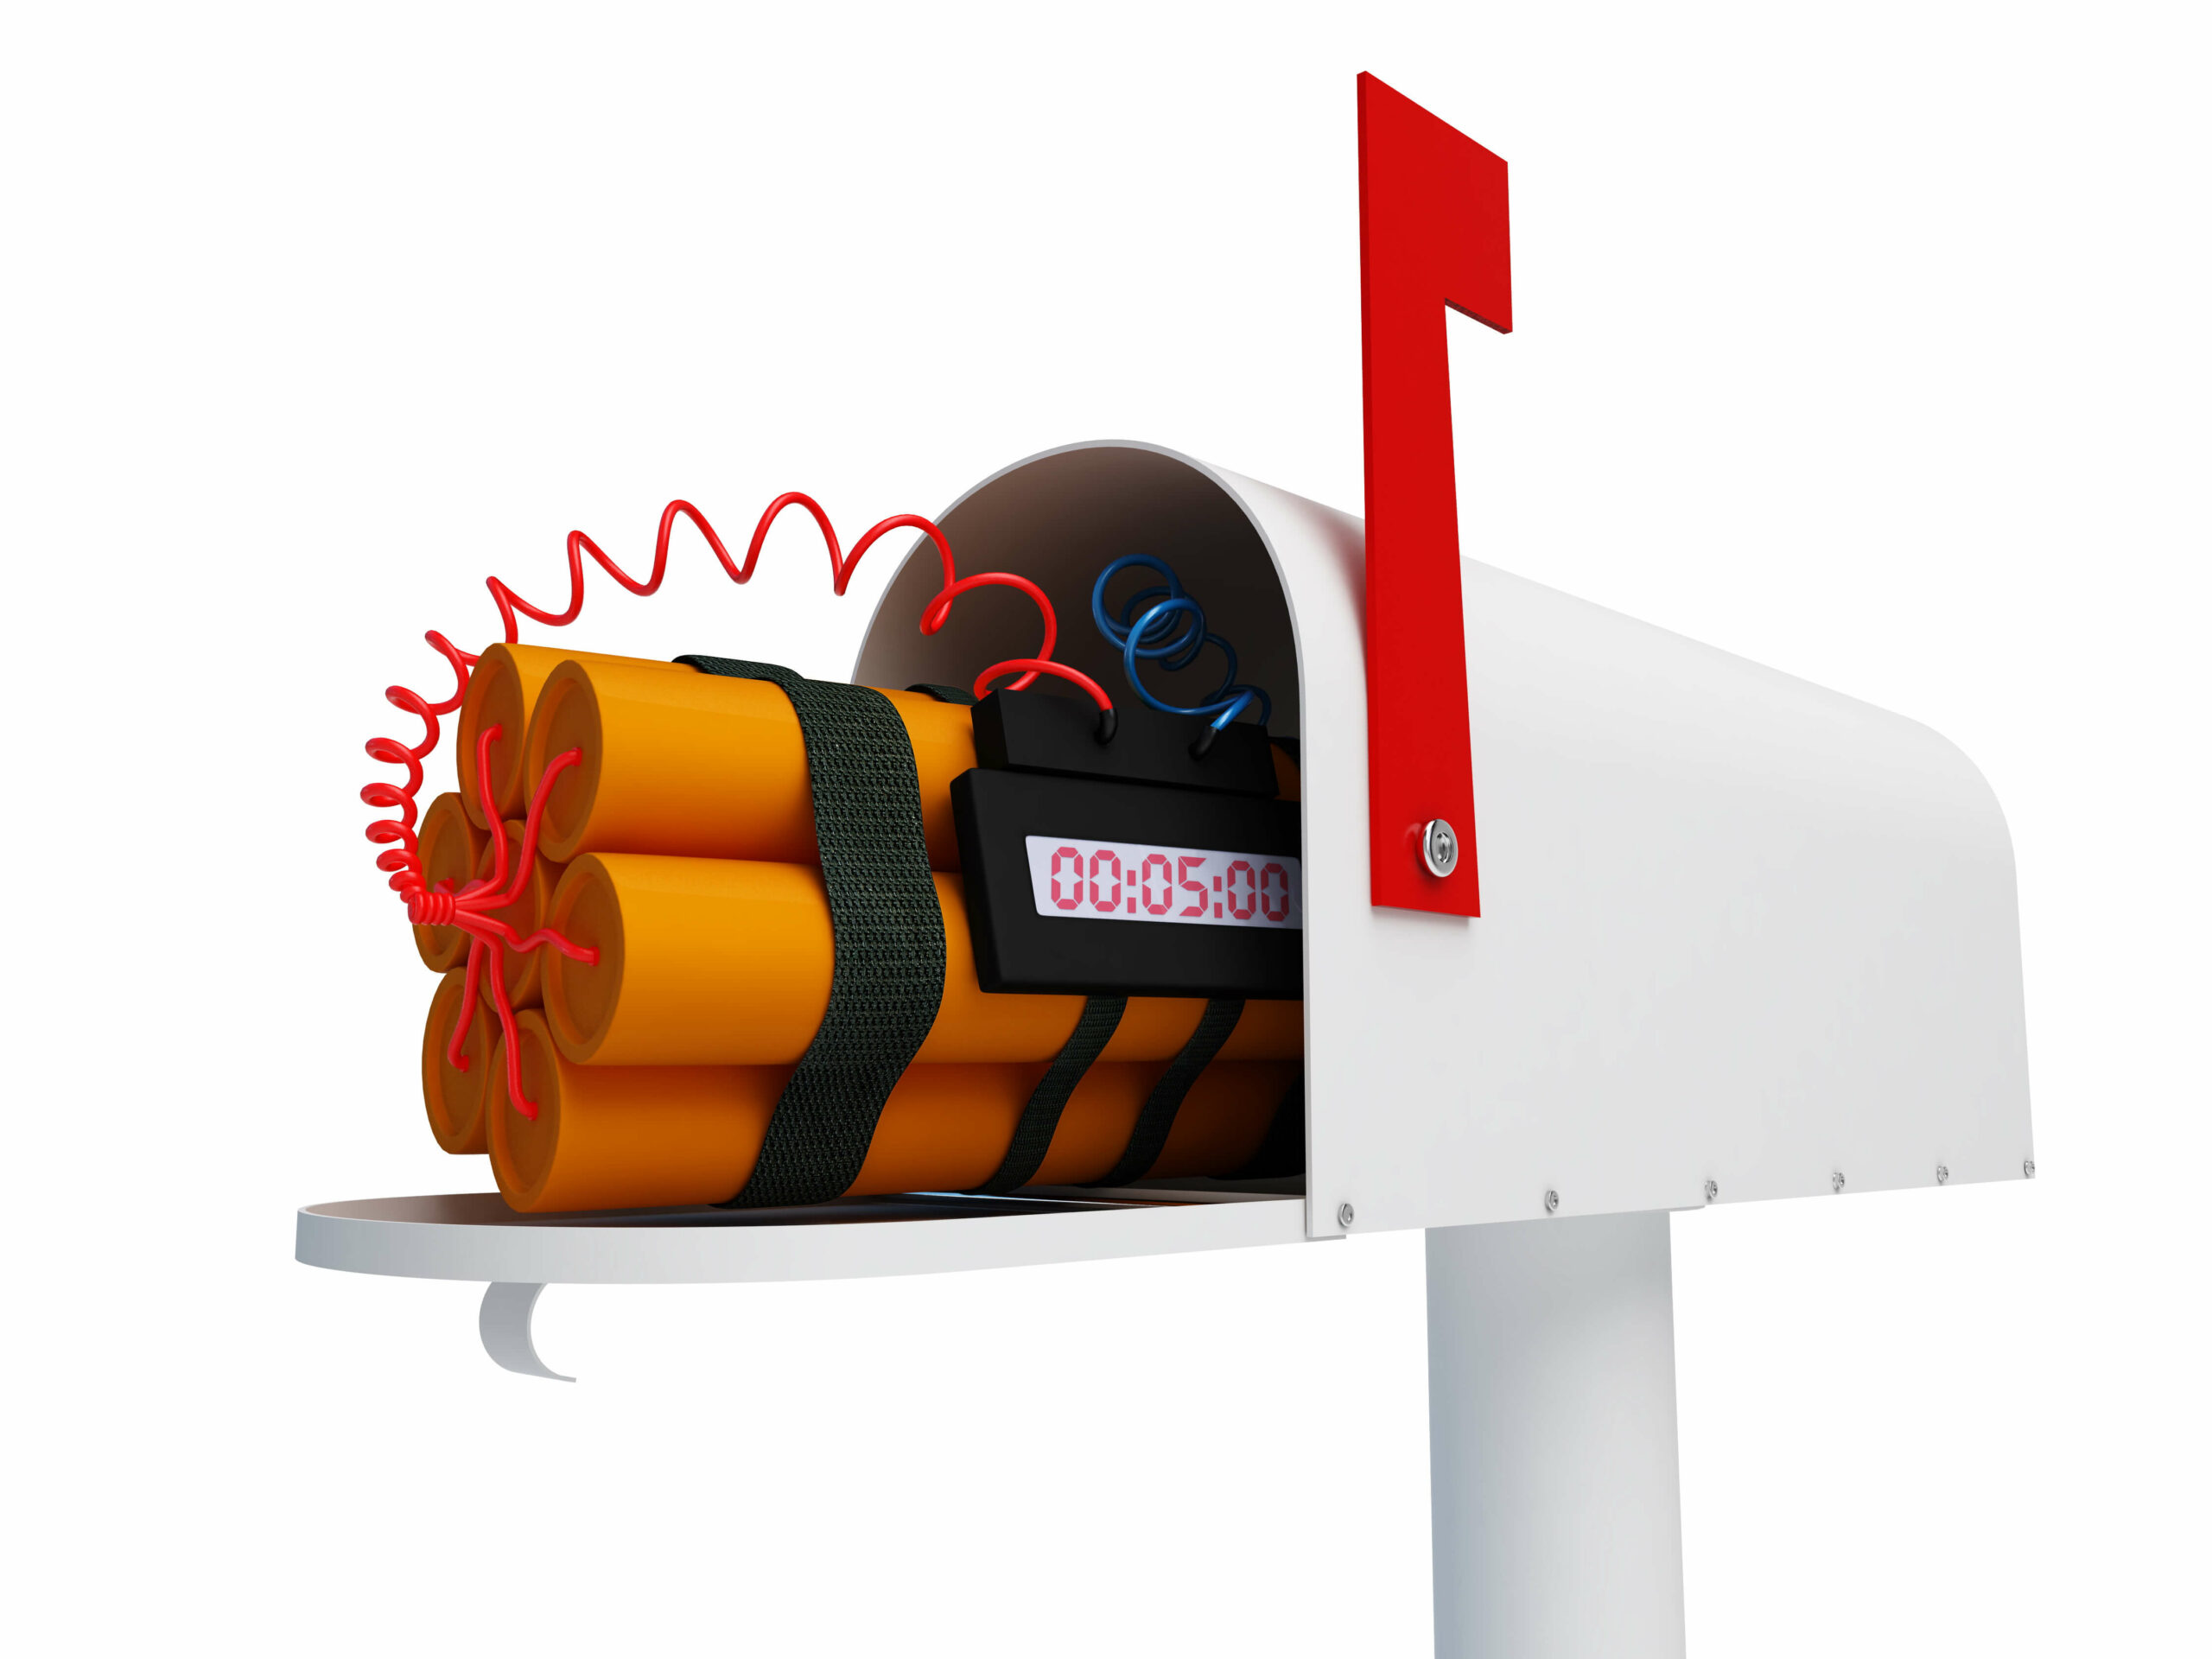 Email bomb